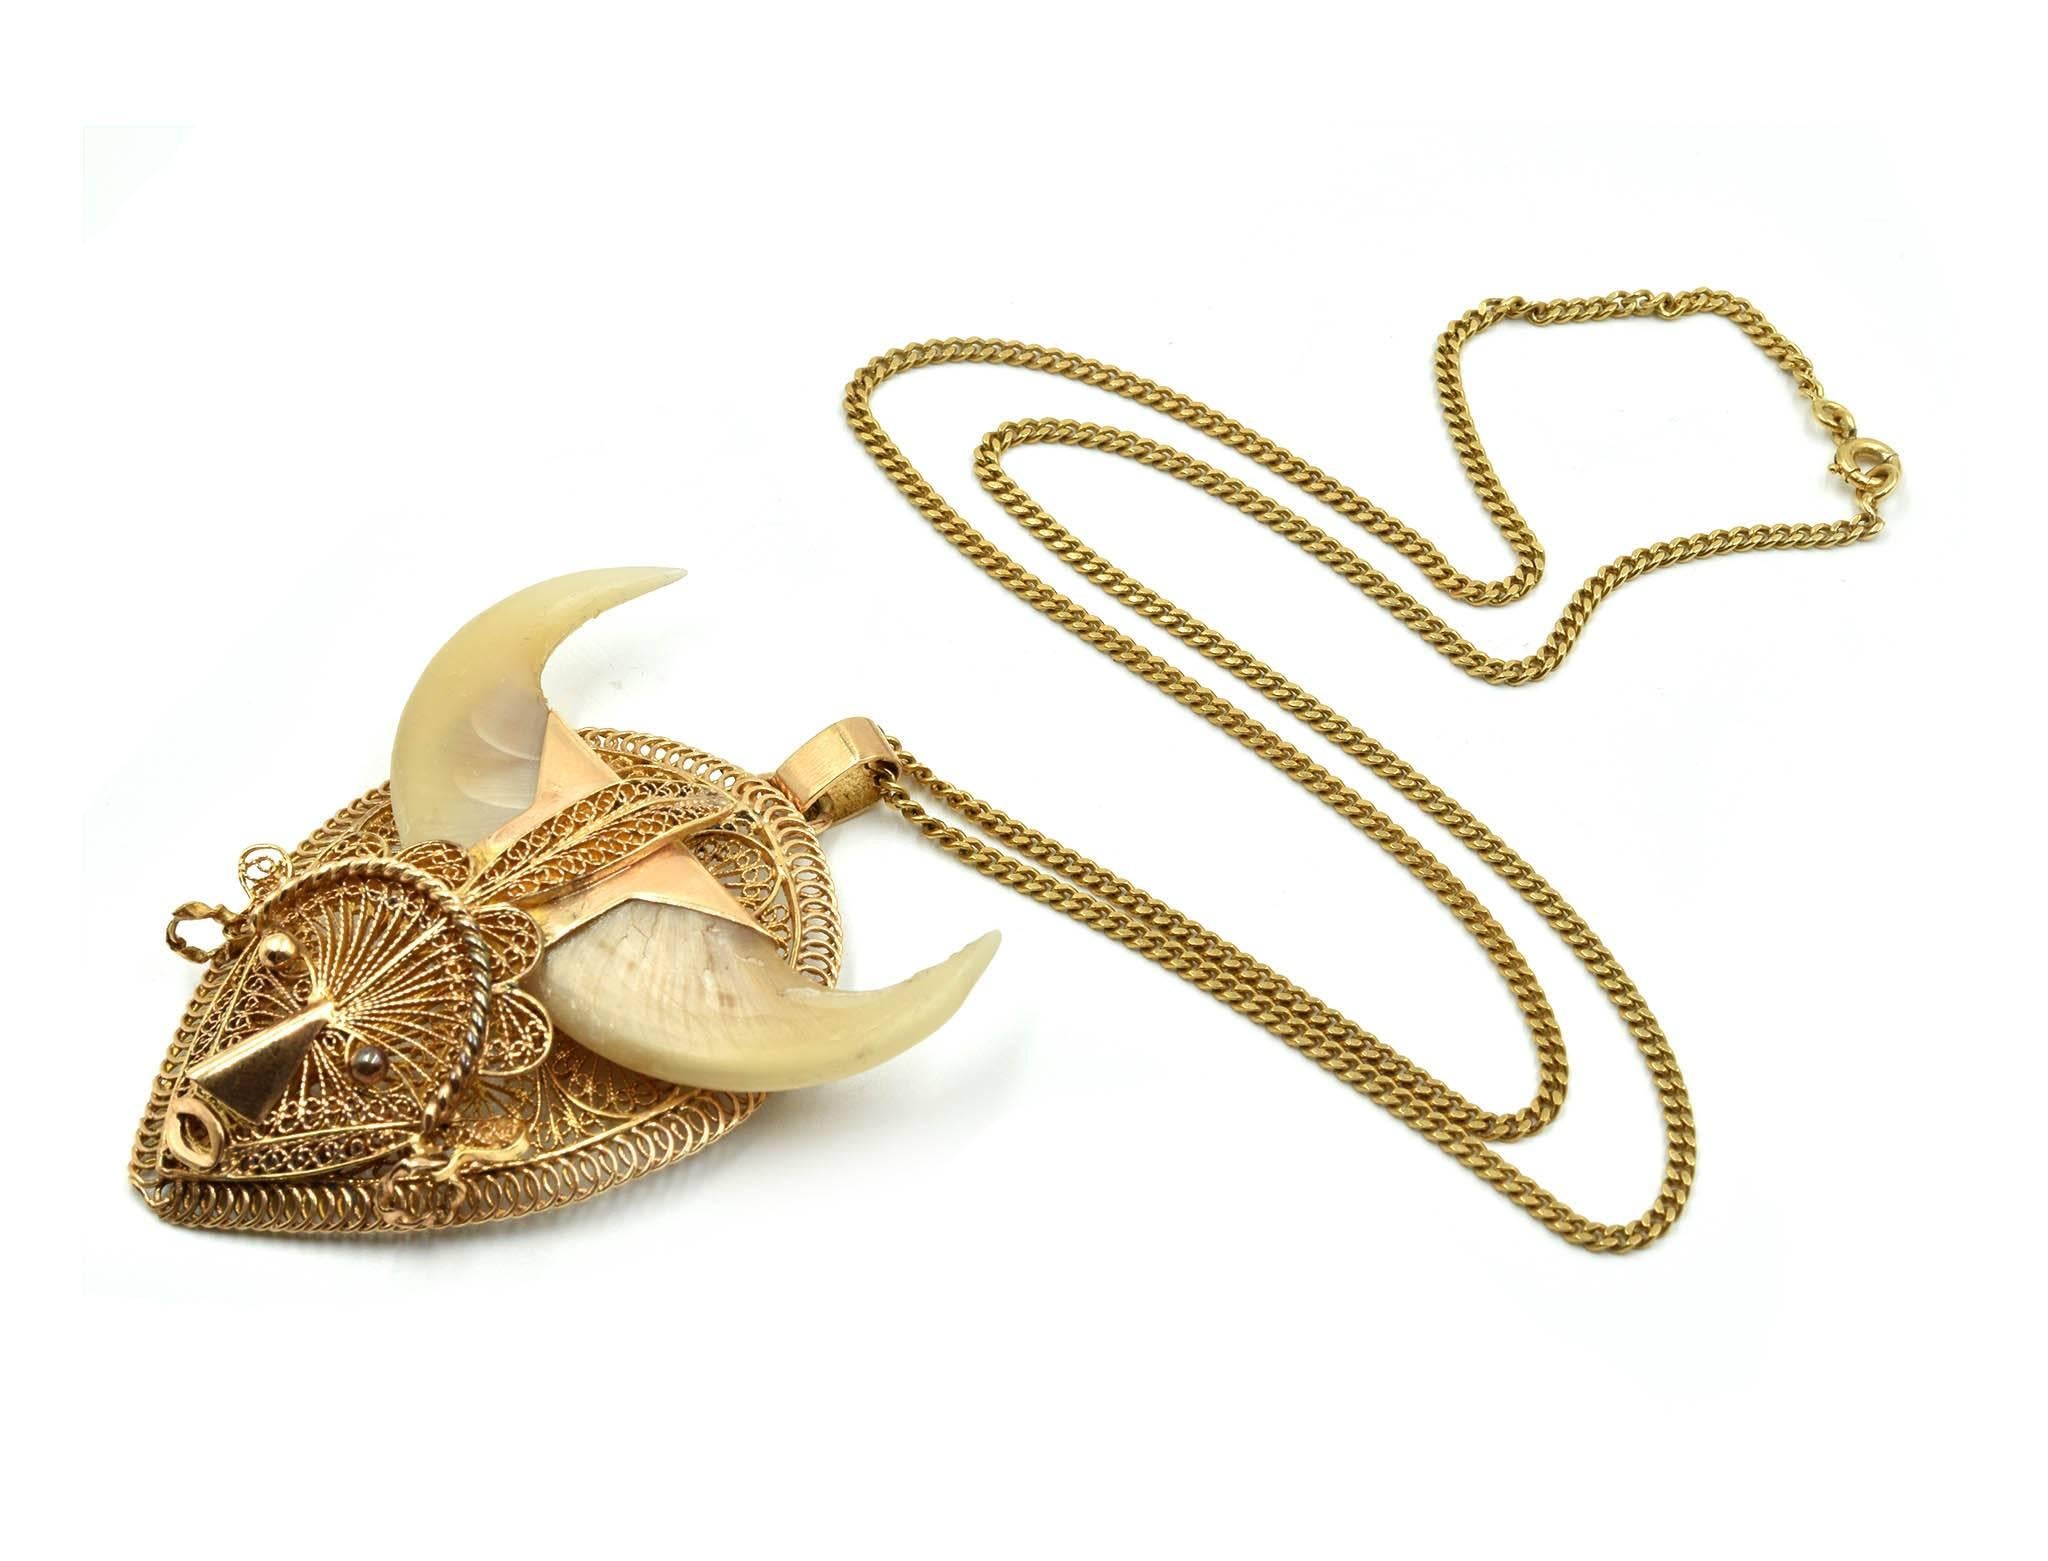 Designer: custom design
Material: 14k yellow gold and two bear claws
Dimensions: pendant is 2 1/2 inches long and 2 inches wide, necklace is 22 inches long
Weight: 35.29 grams

